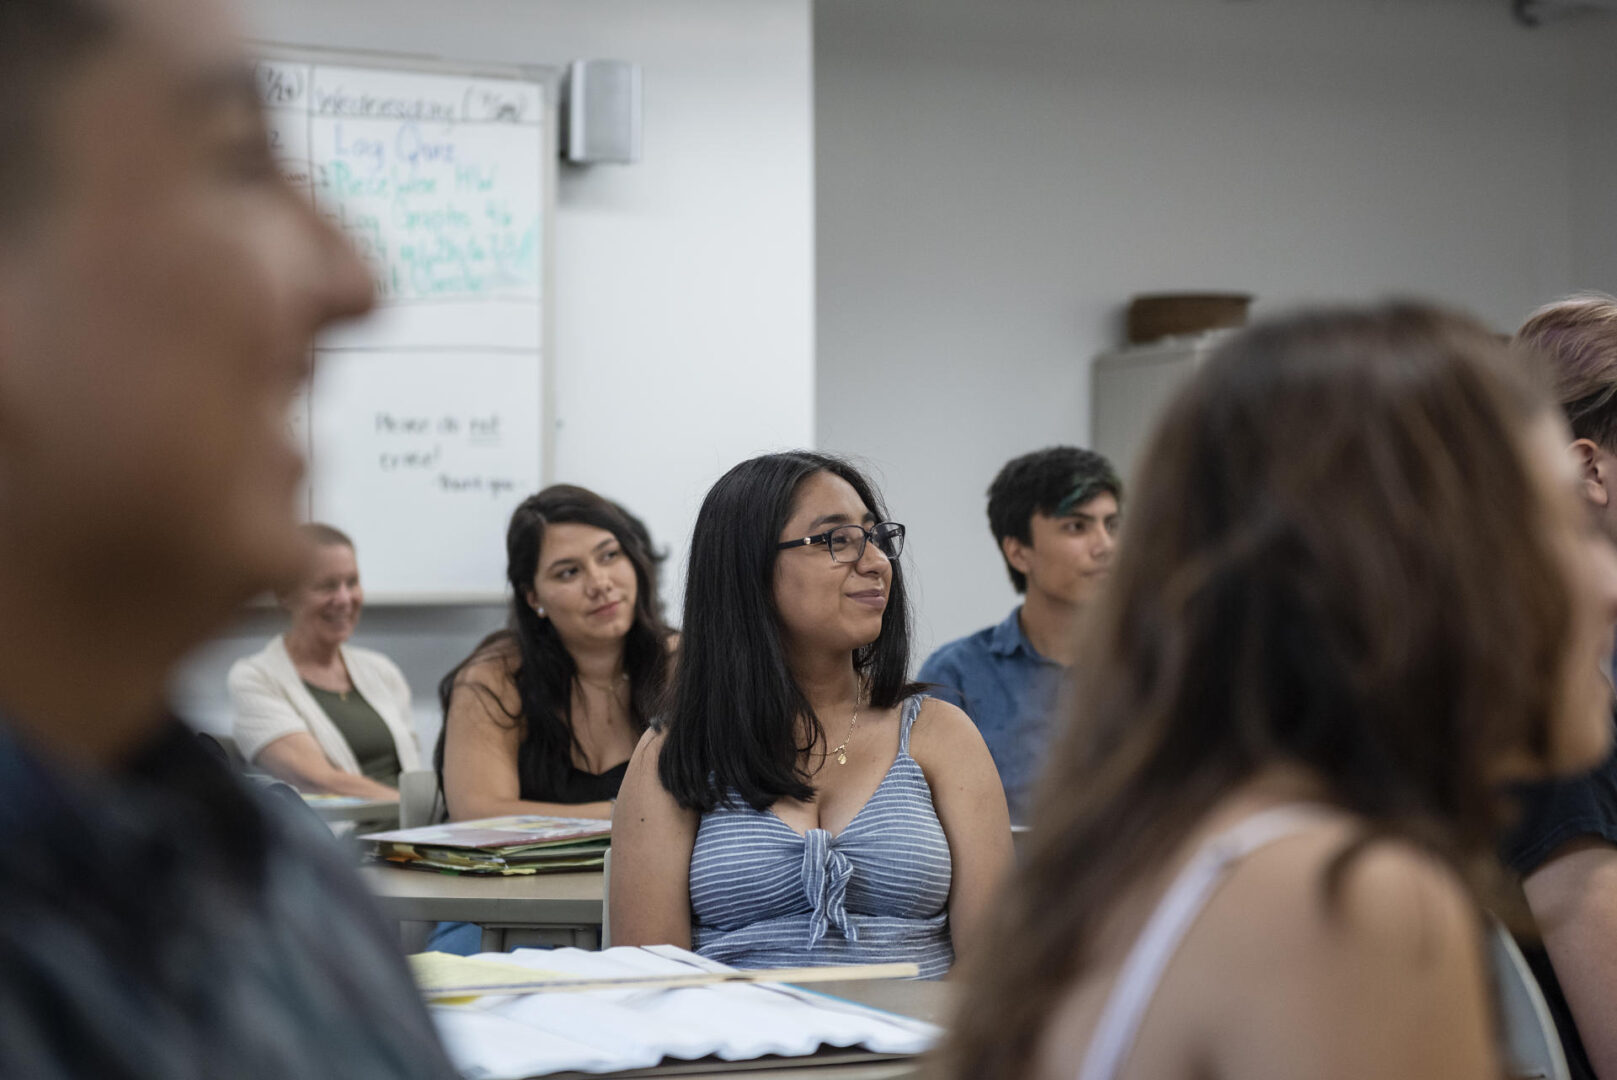 As an incoming freshman, Nayellie Barragan-Mejia participated in the Louis Stokes Alliance for Minority Participation (LSAMP) summer calculus boot camp and said it was a great experience that allowed her to meet her peers.